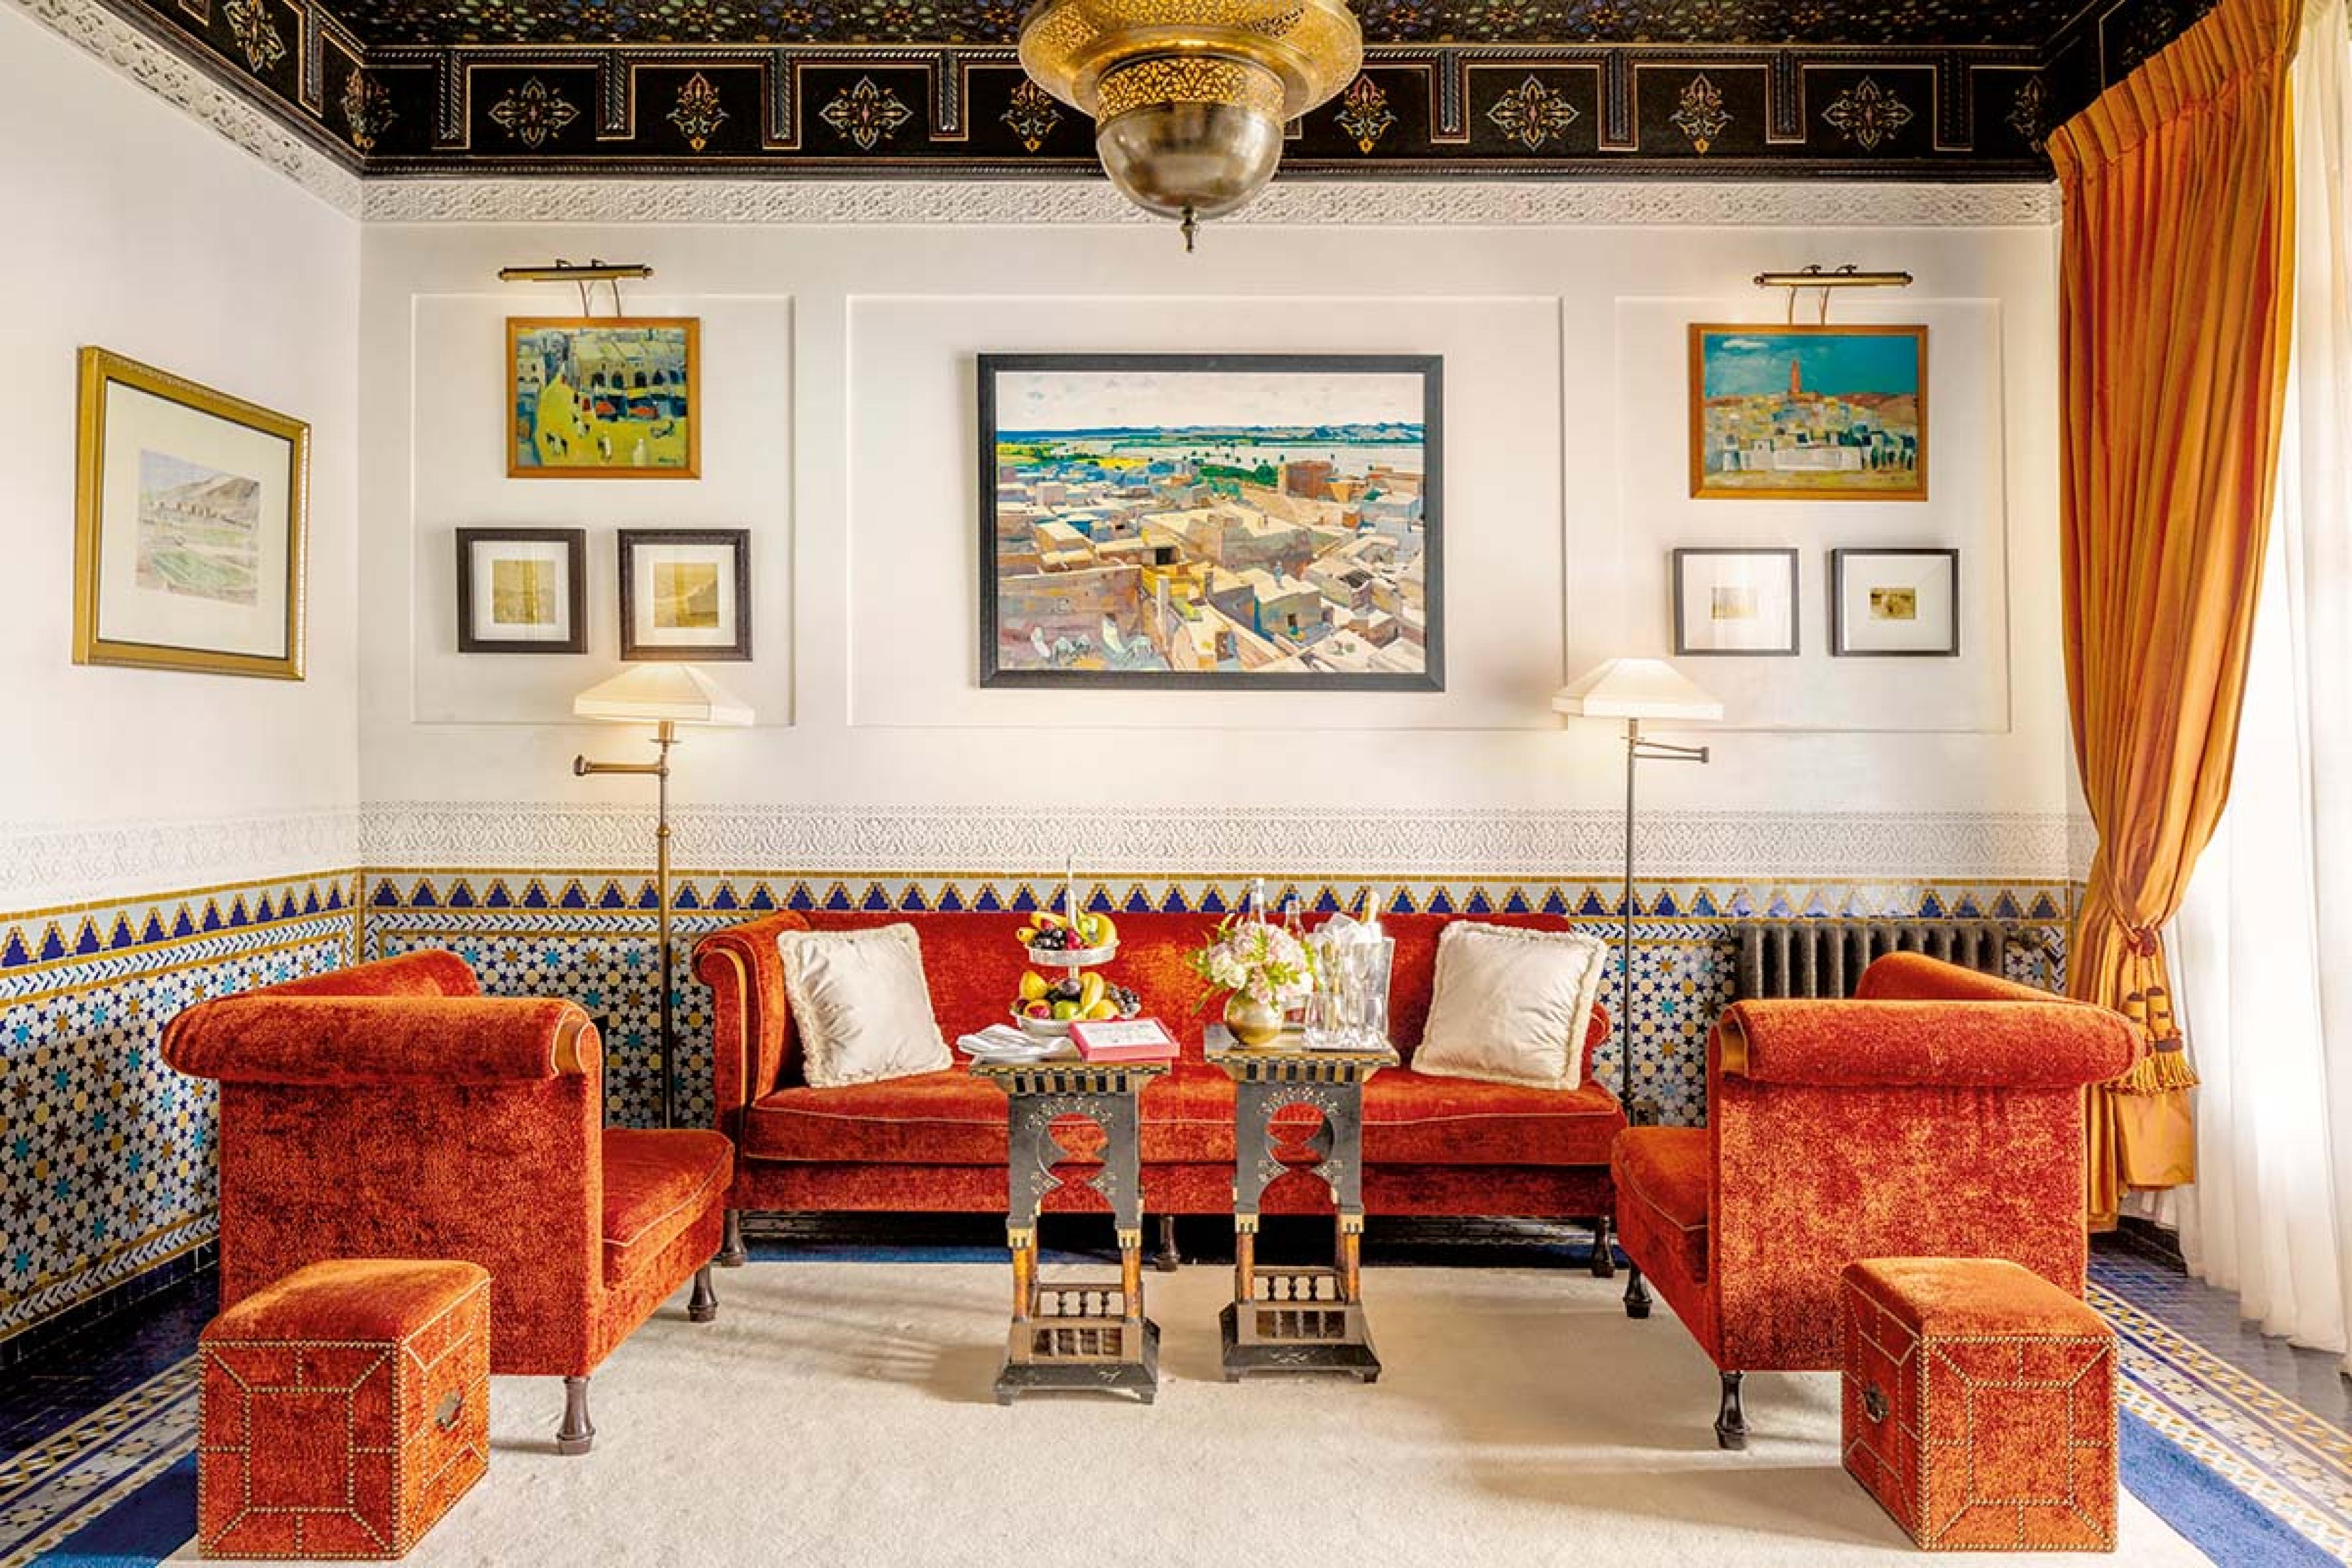 living room with orange crushed velvet couches and paintings on the walls